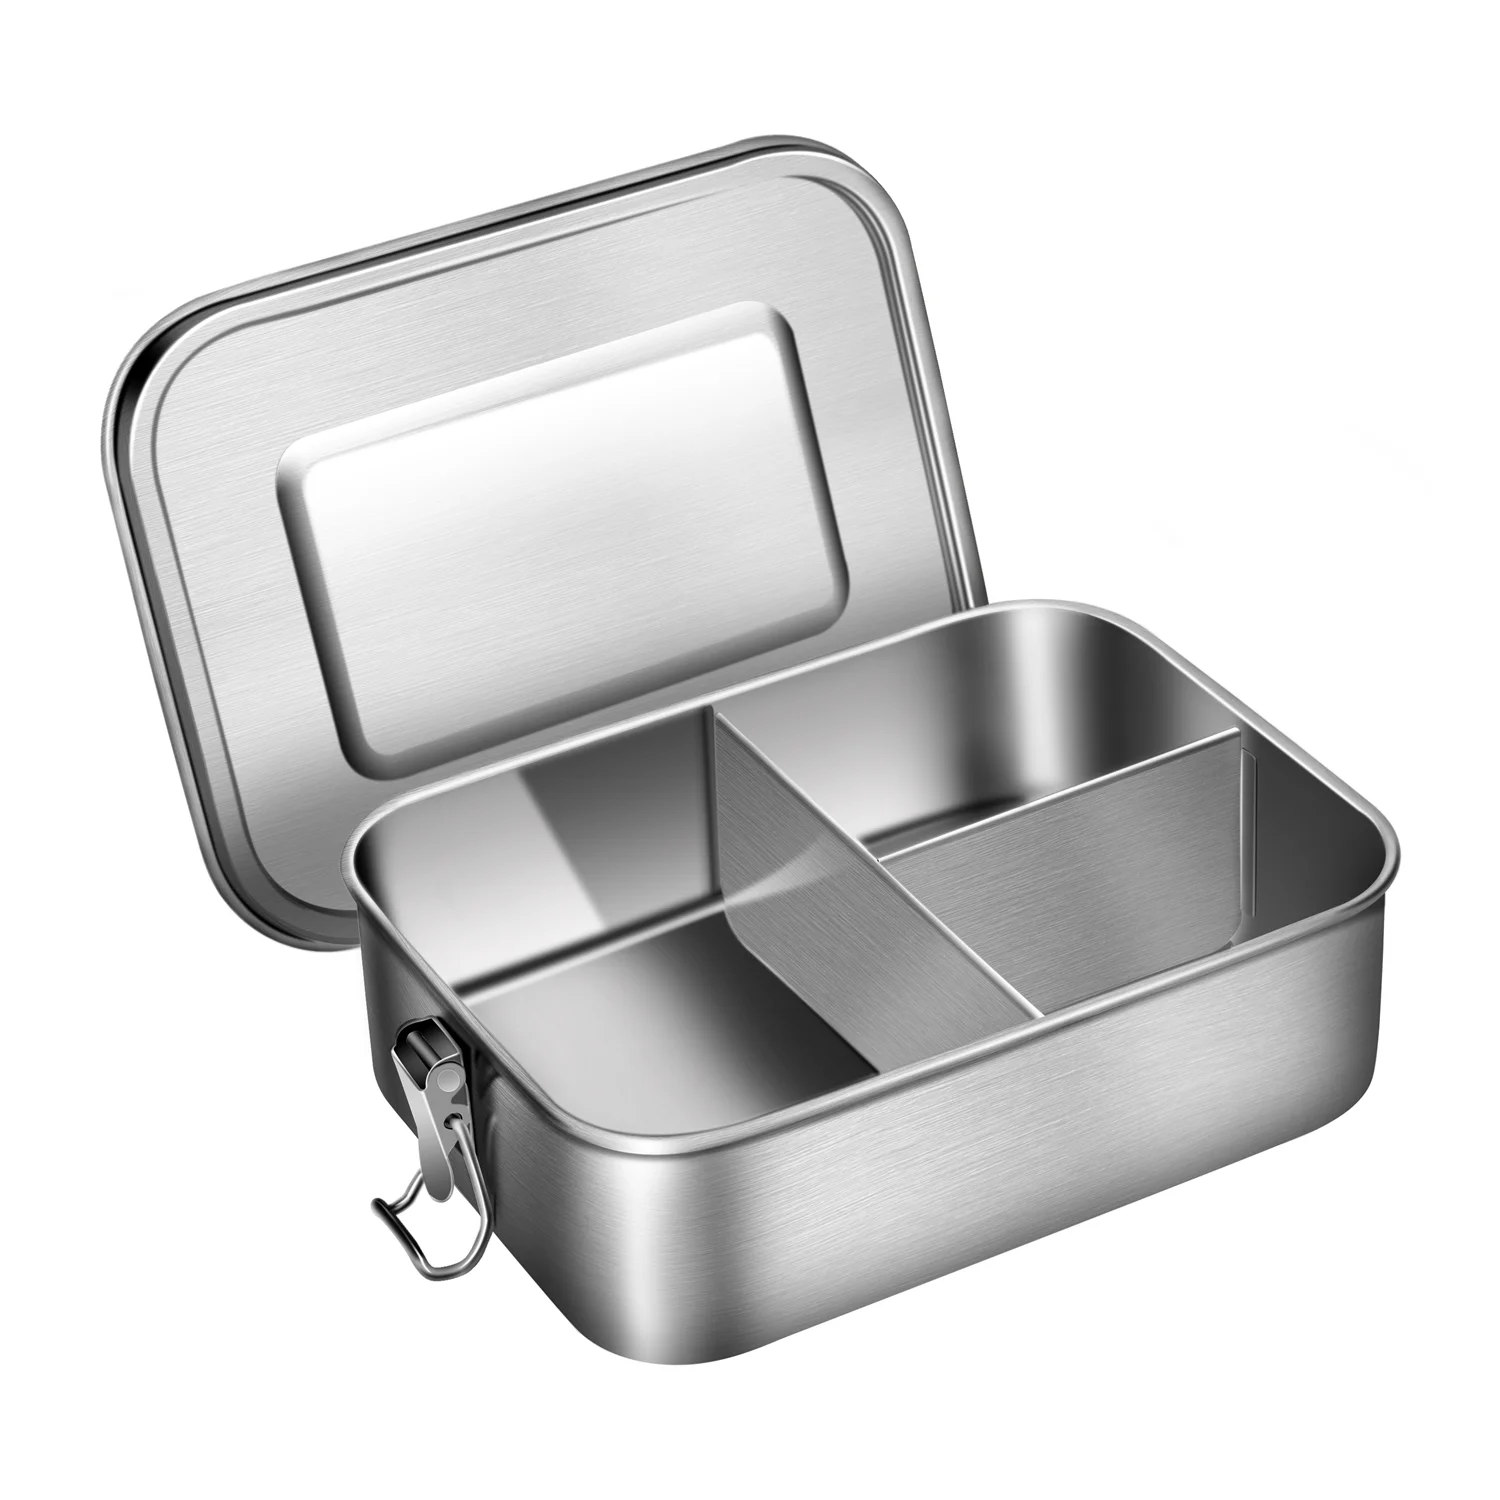 18/8 Stainless Steel Bento Box (Compact Lunch Box) - 3 Compartment Metal  Lunch Contai - Miscellaneous